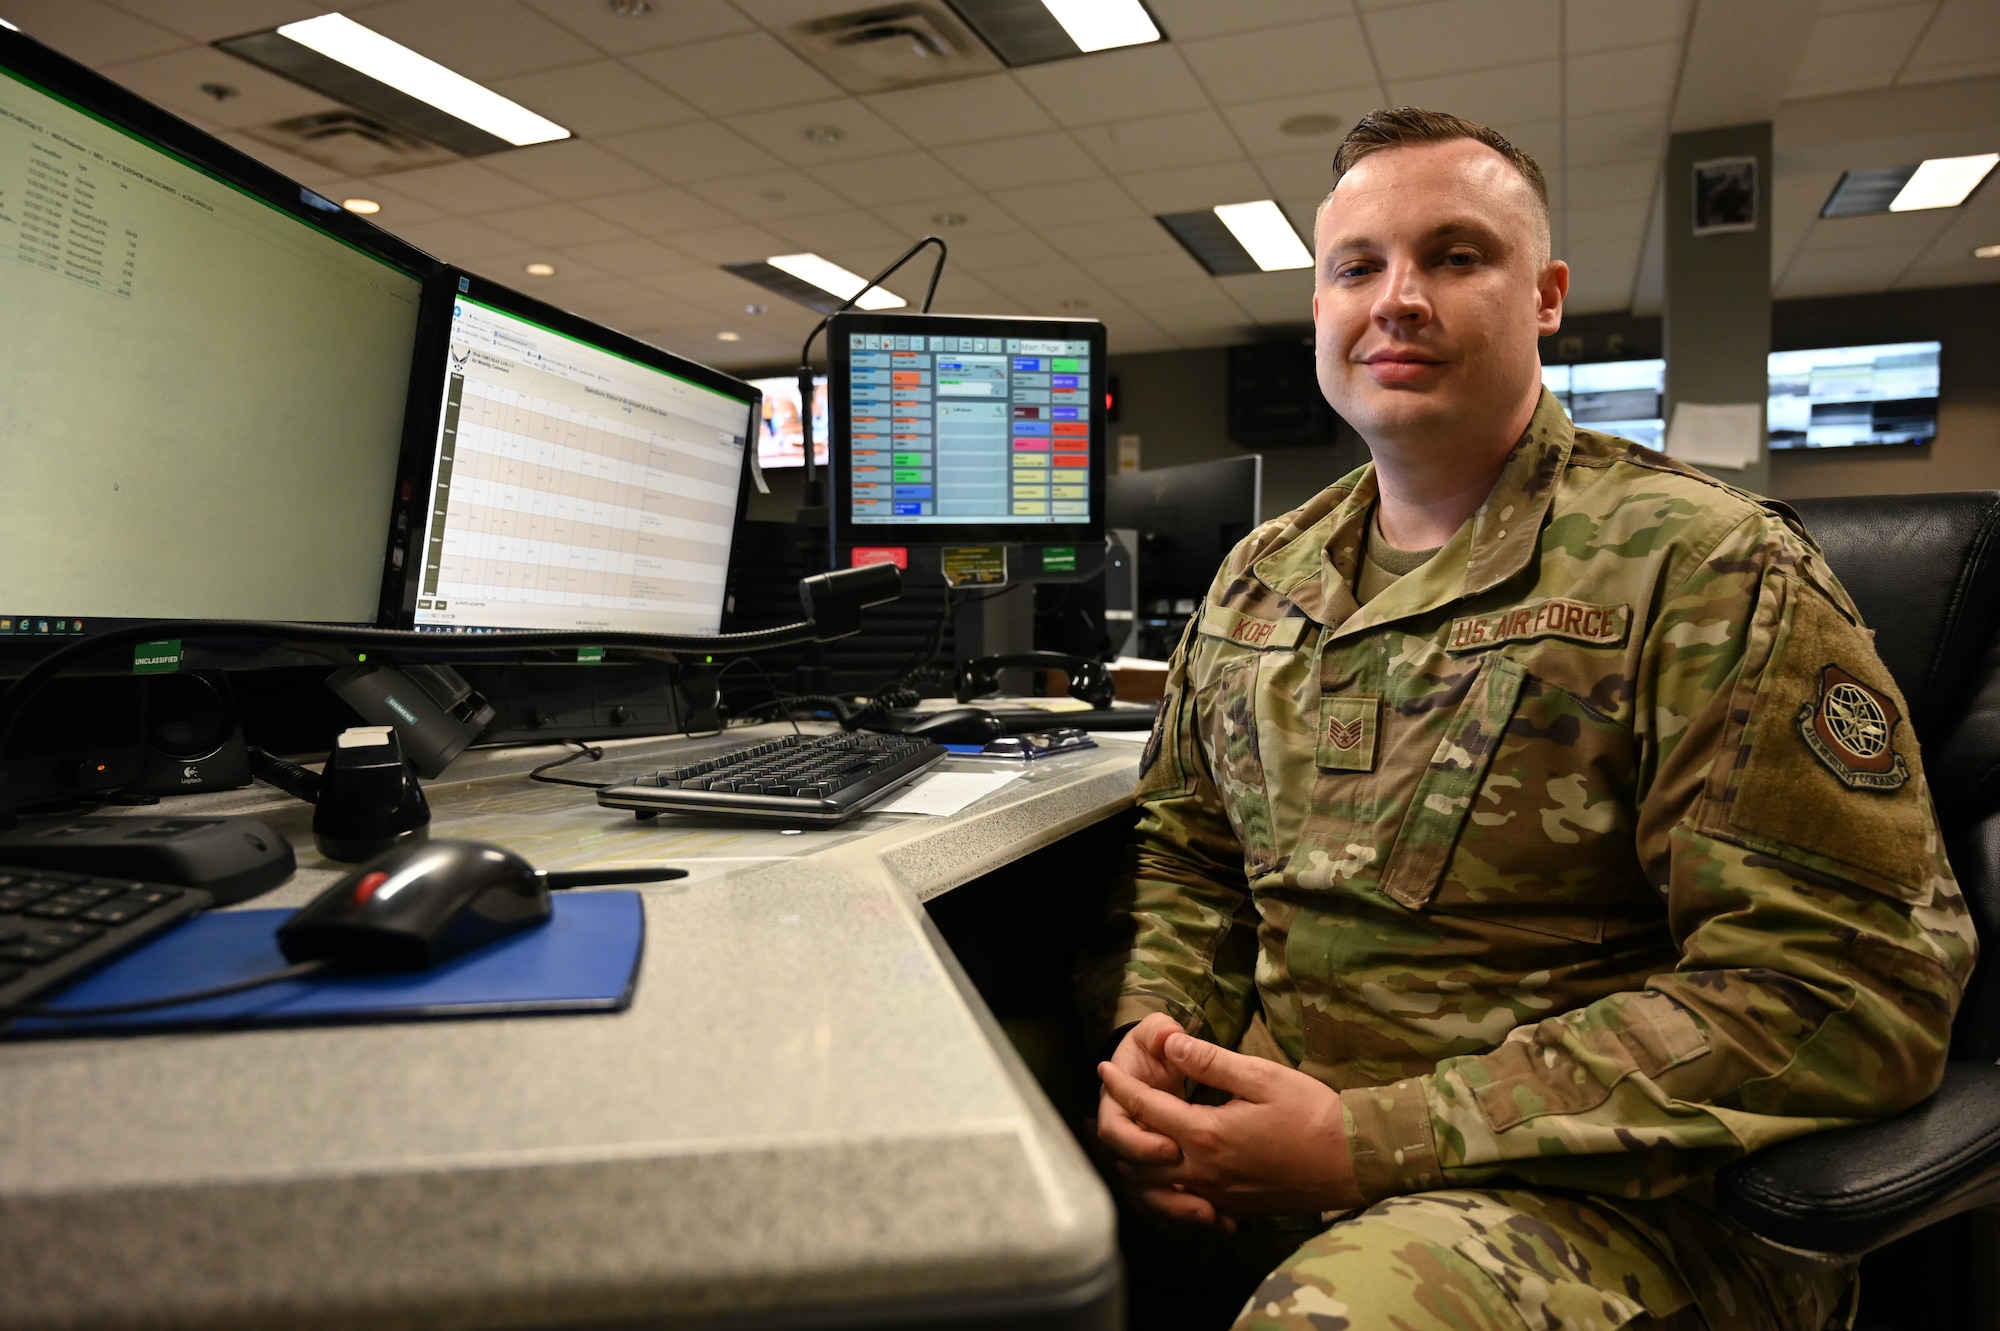 An airman poses for a photo at a desk.